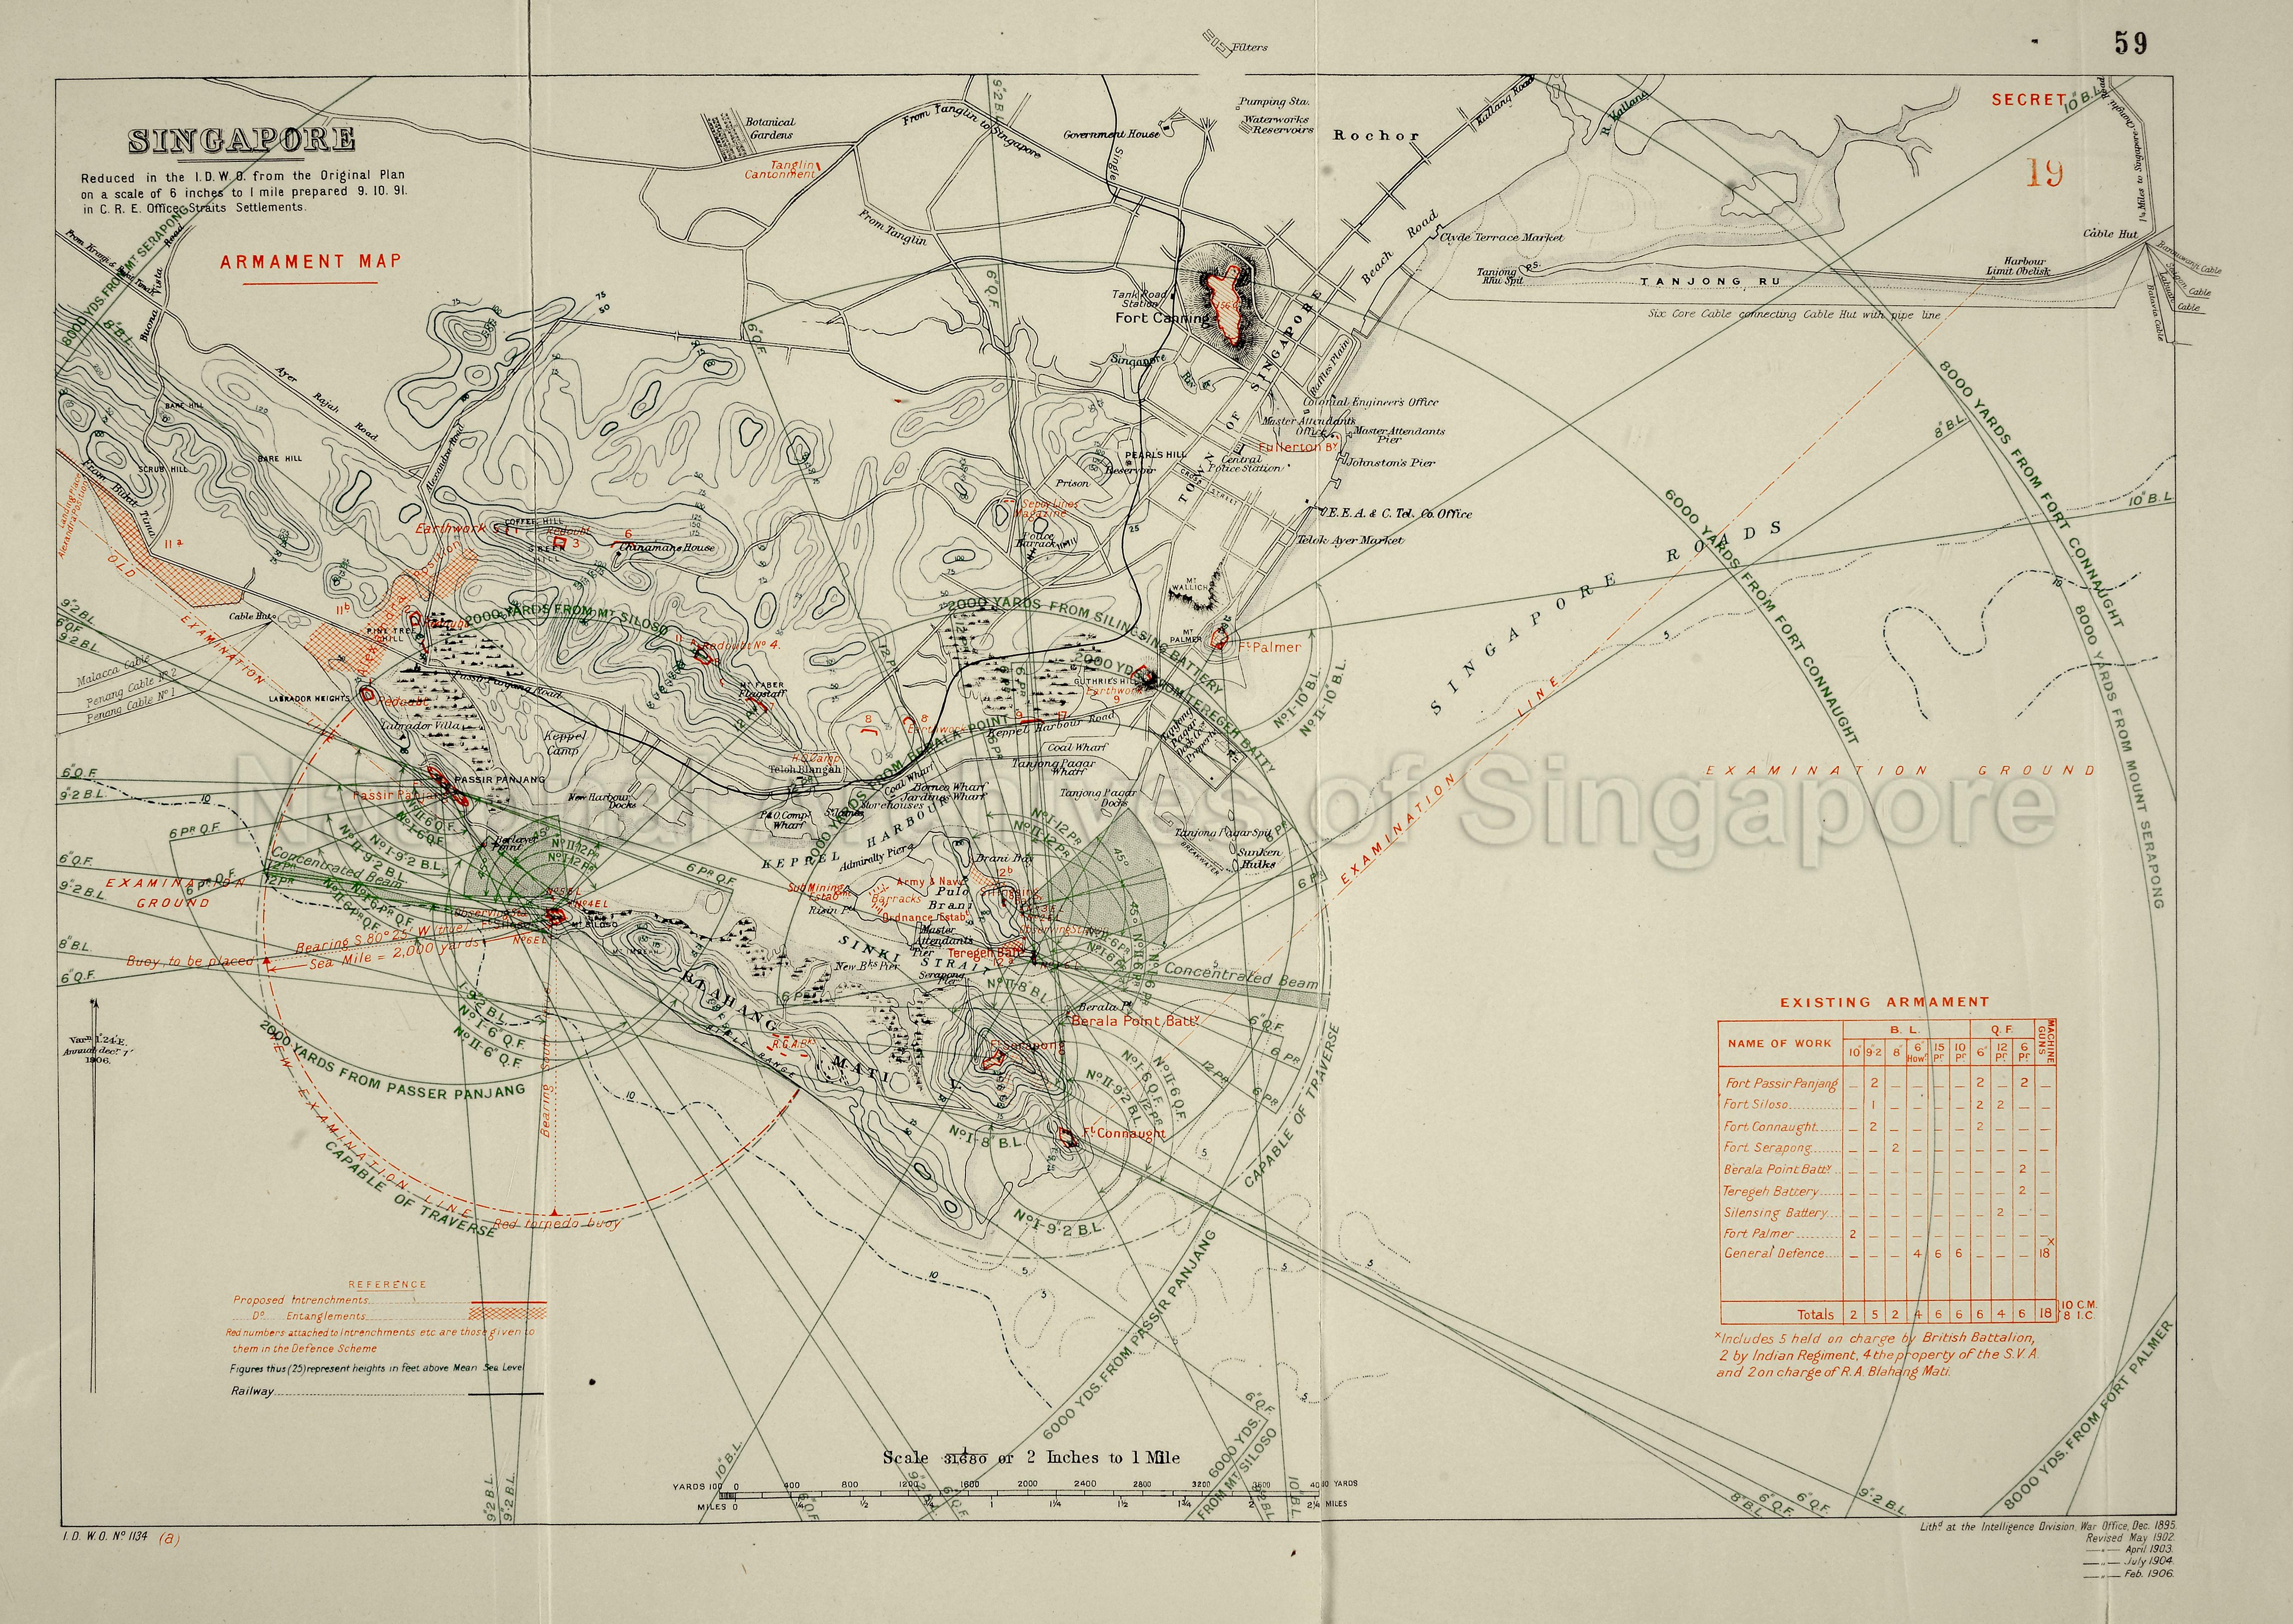 Singapore Town and New Harbour: armament map, 1906